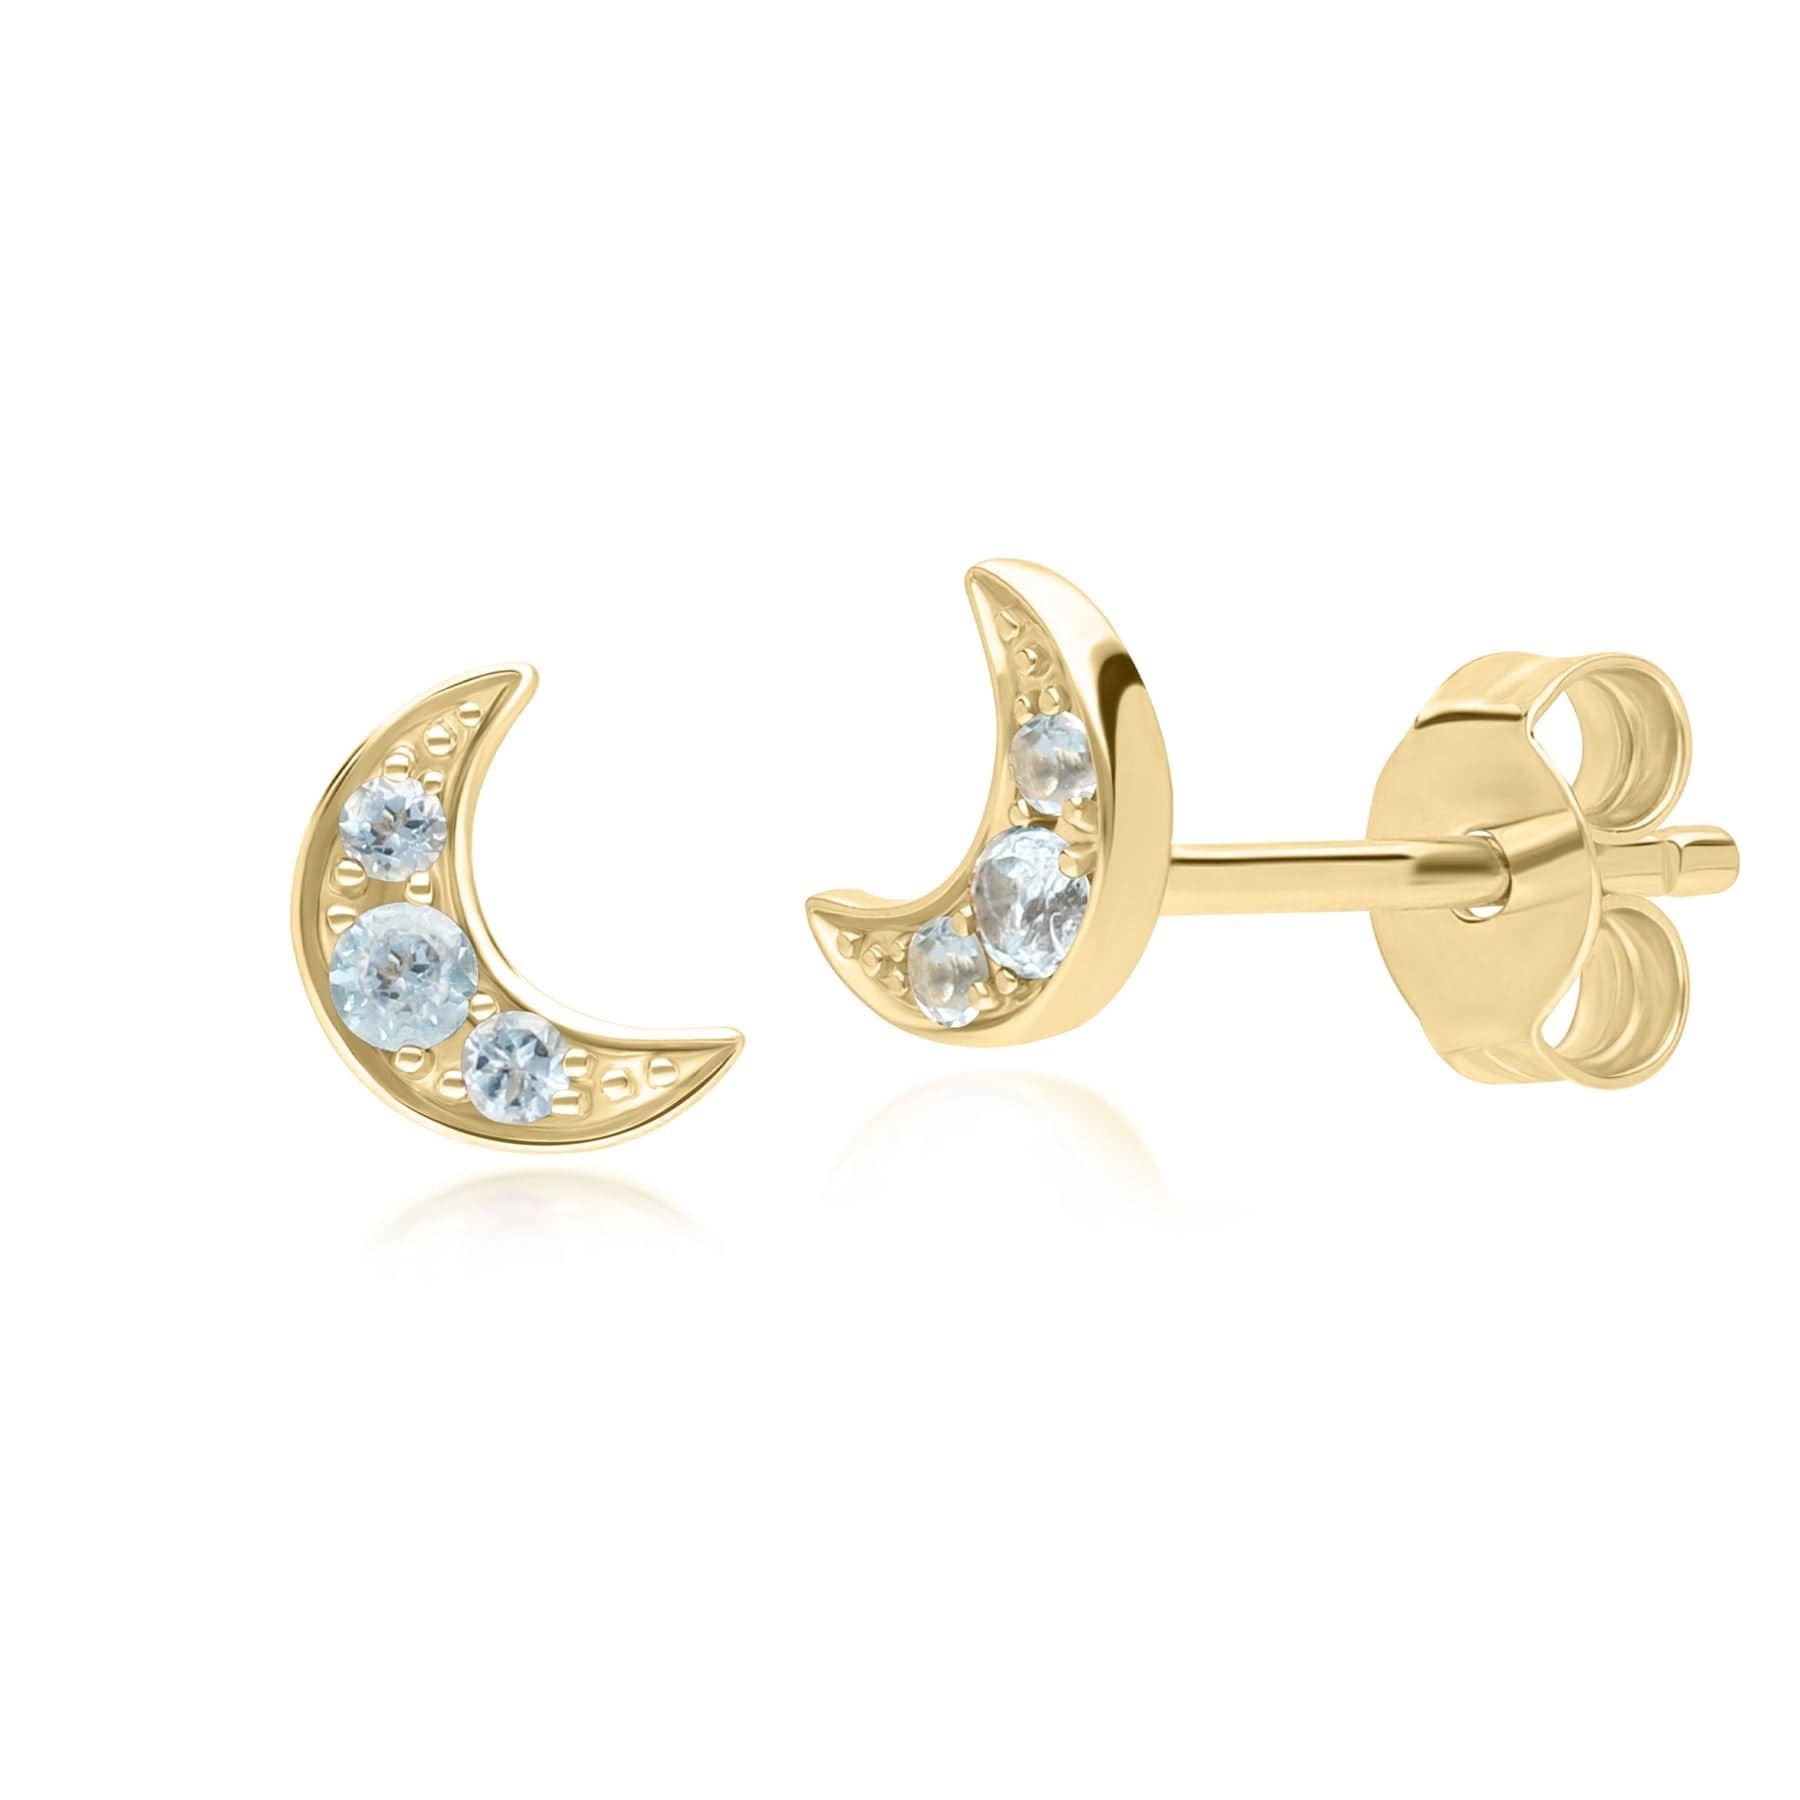 135E1819039 Night Sky Topaz Moon Stud Earrings in 9ct Yellow Gold Front